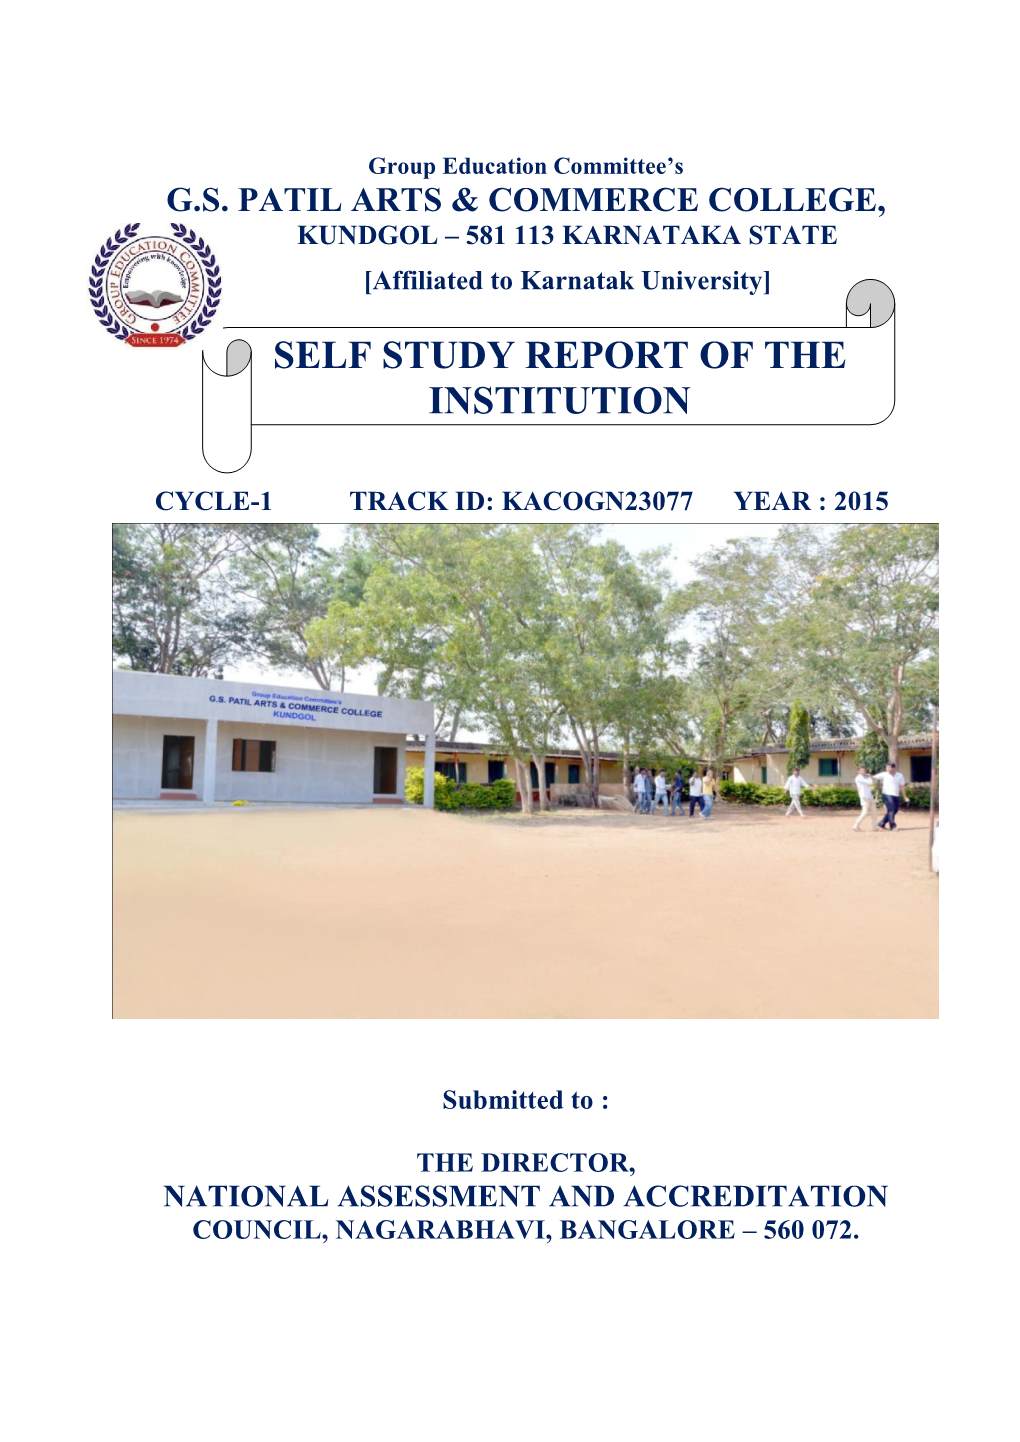 Self Study Report of the Institution